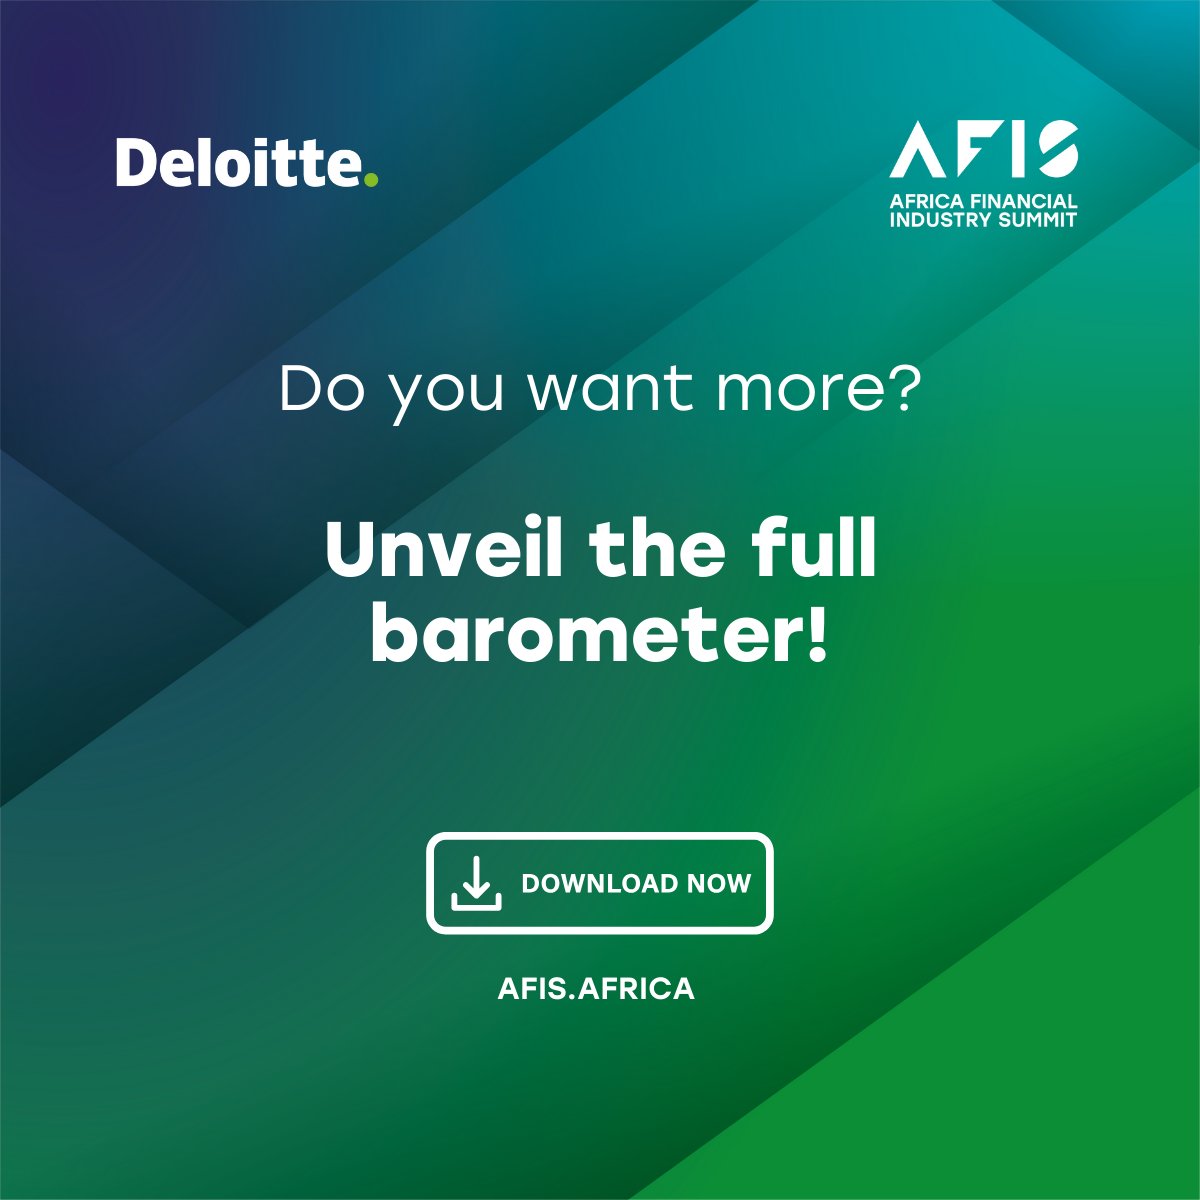 Discover more about the transformation, innovation, and collaborative efforts shaping #AfricanFinance. Access the full #AfricanFinancialIndustryBarometer2023 for comprehensive insights and analyses.

🔗 The full report is available bit.ly/AfricanFinanci…